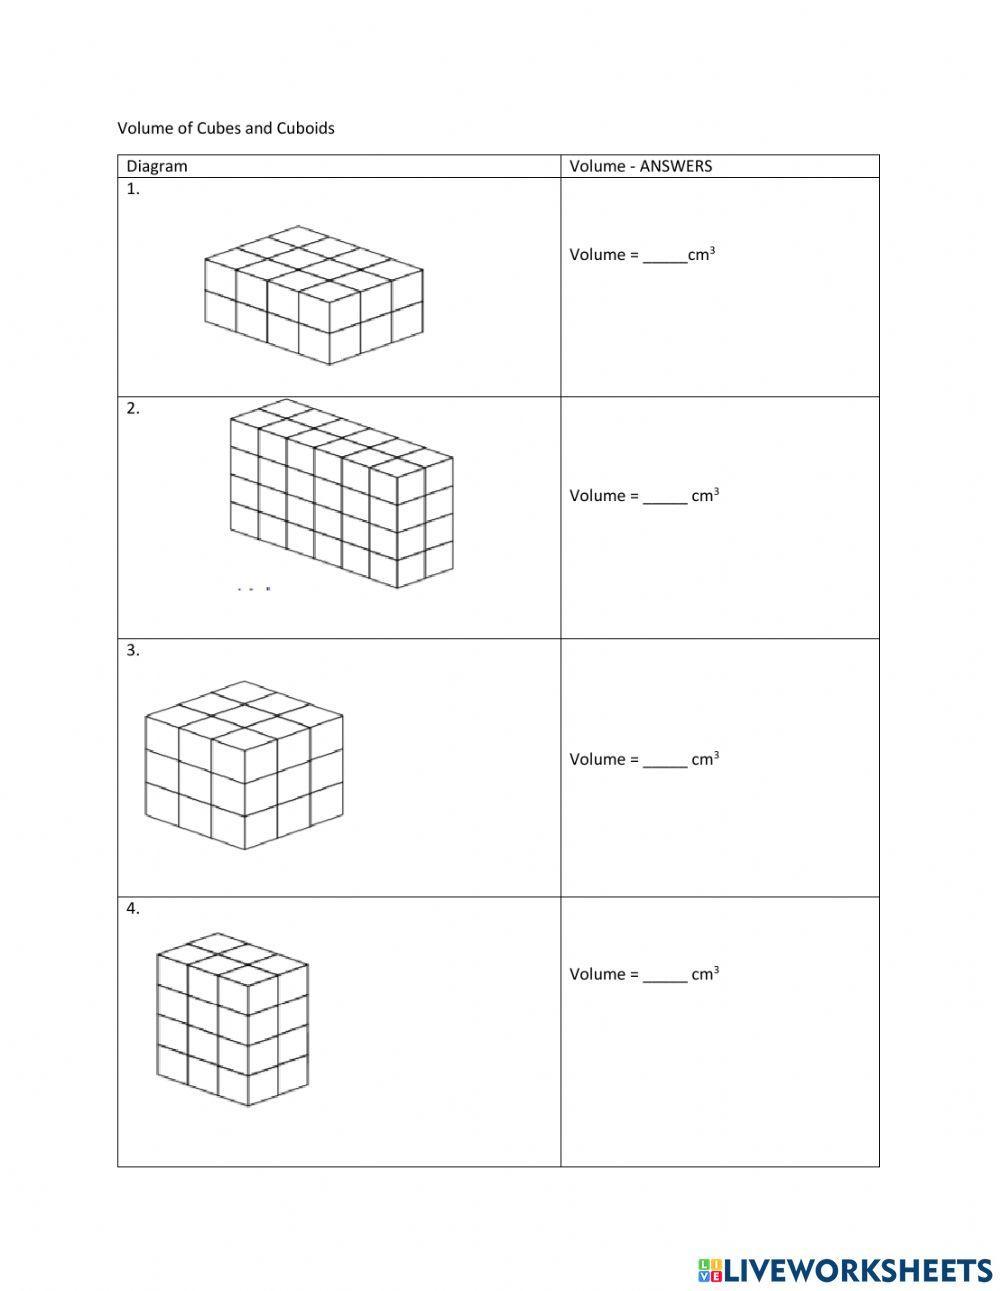 Year 5 Tr 3 Week 1- Volume of cubes and cuboids